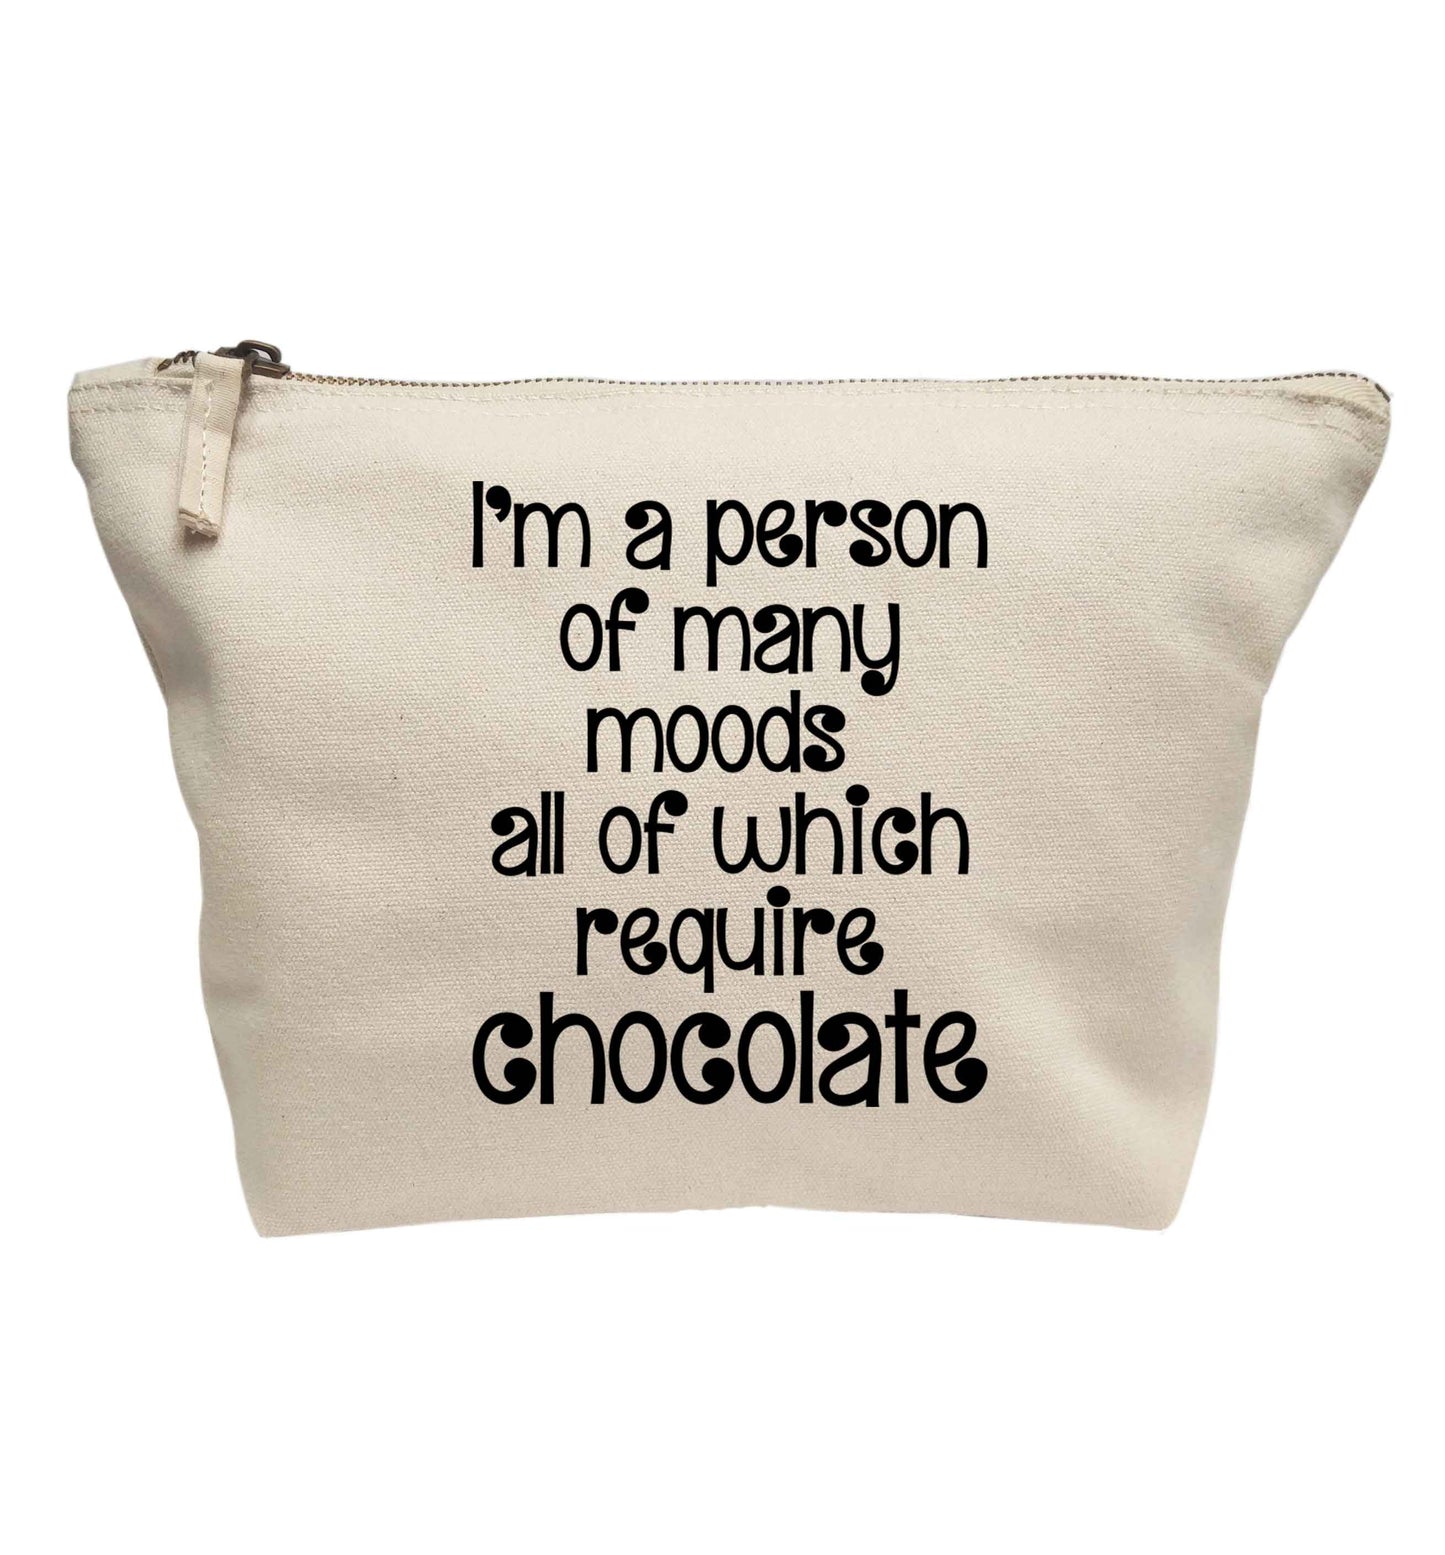 I'm a person of many moods all of which require chocolate | Makeup / wash bag